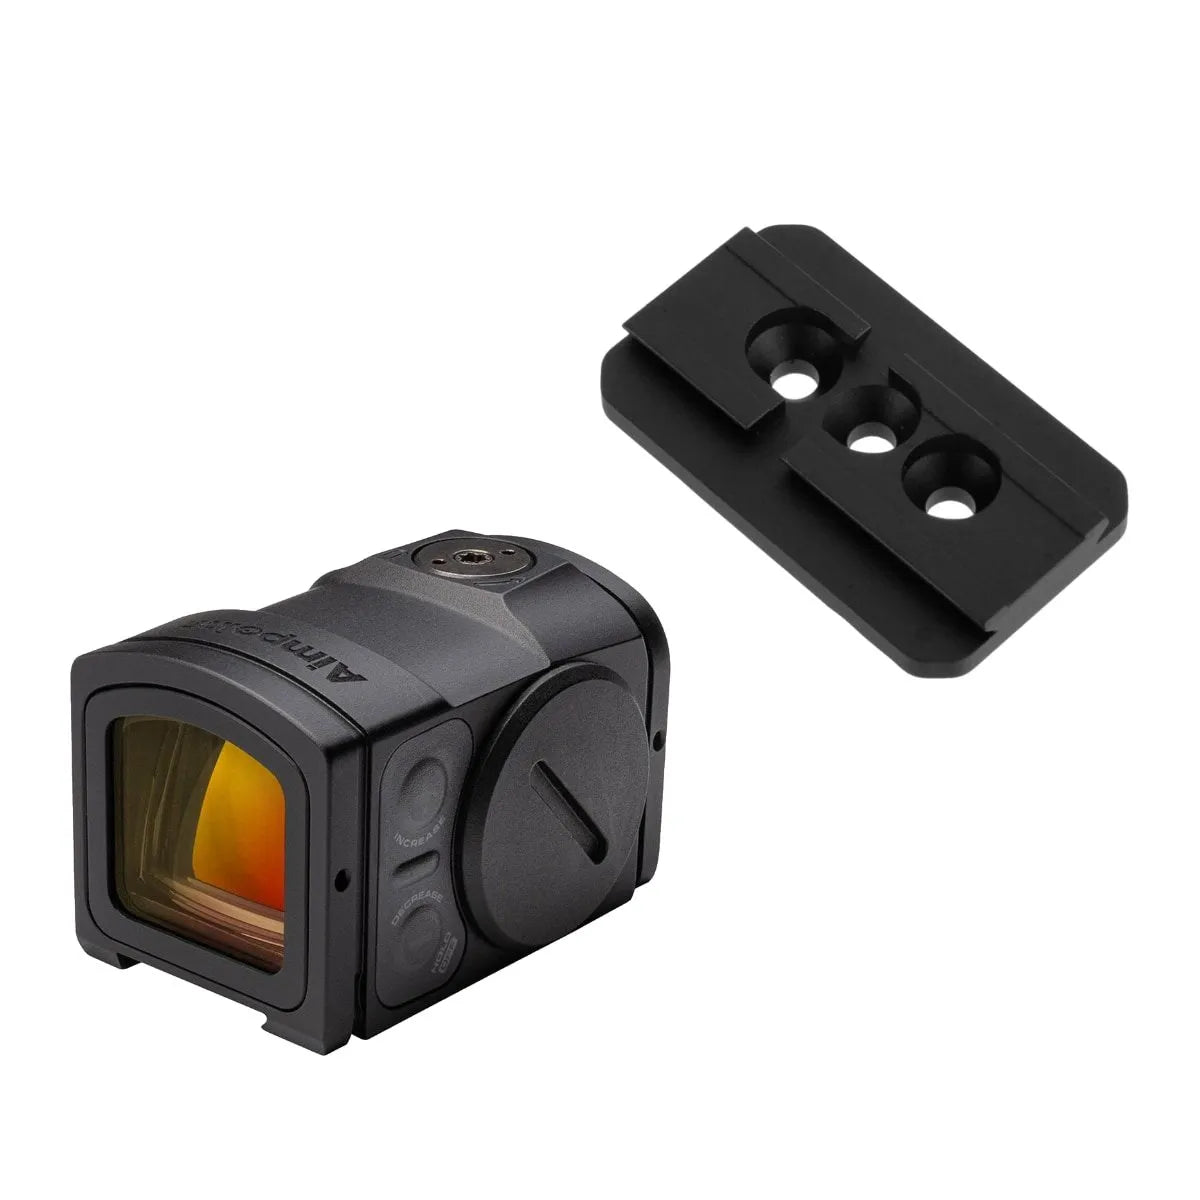 LPVO Side Rail Optical Sight Adapter Plate